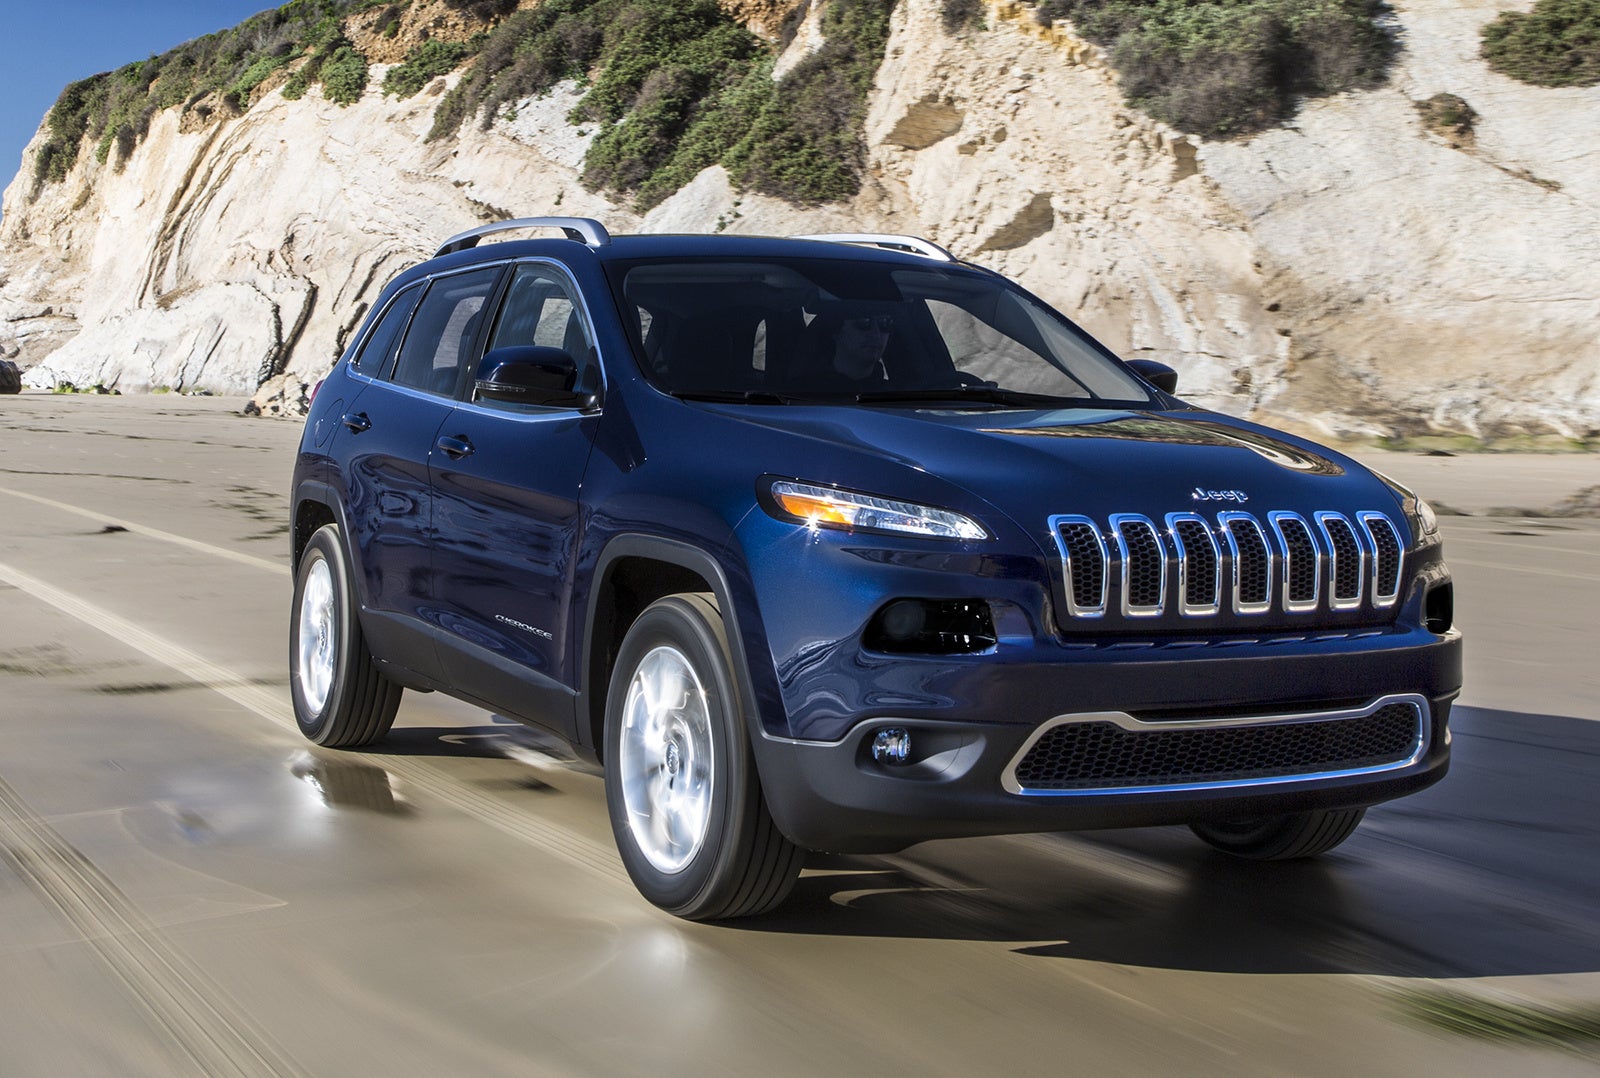 2019 Jeep Cherokee Trailhawk Interior Review Photos New